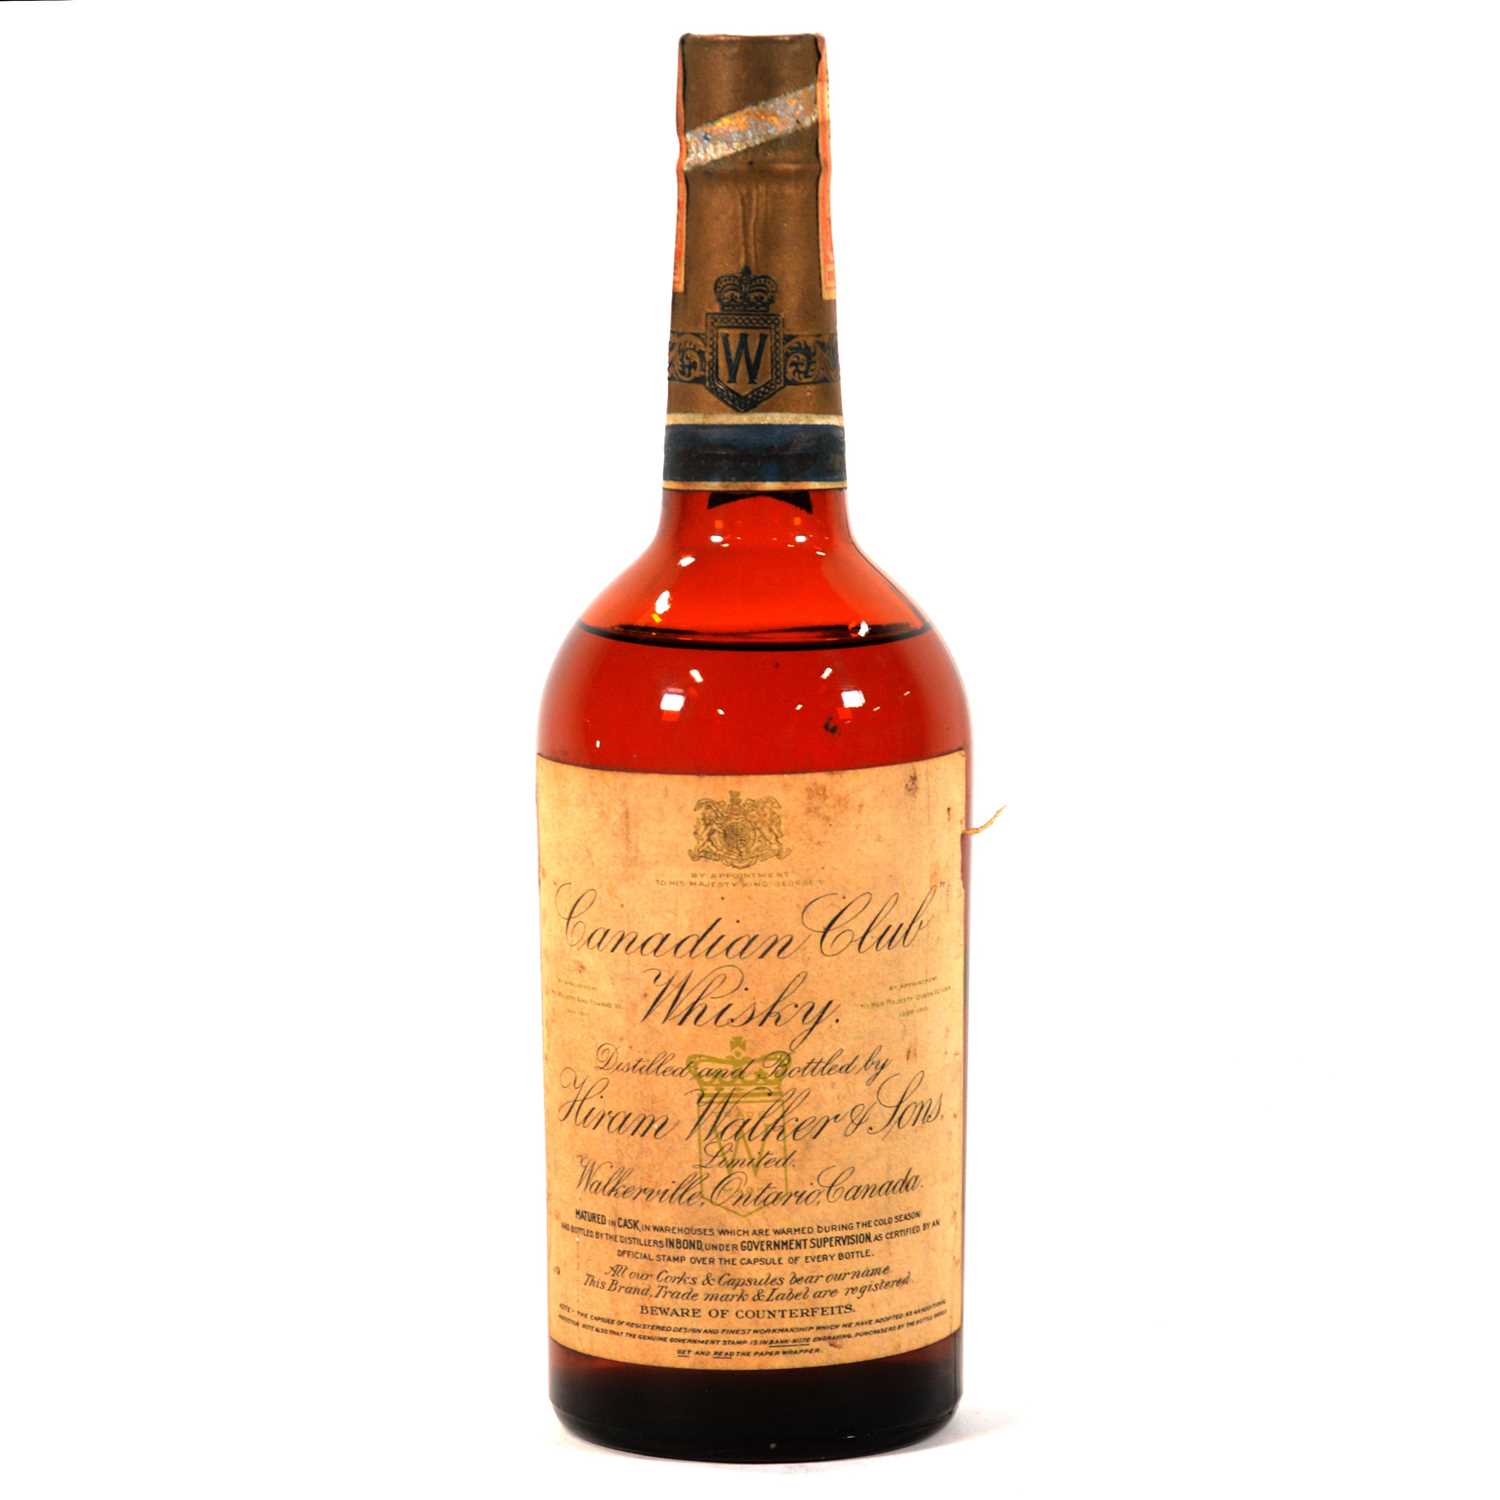 Lot 130 - Canadian Club 1932, a rare bottle of blended whisky from the Prohibition era